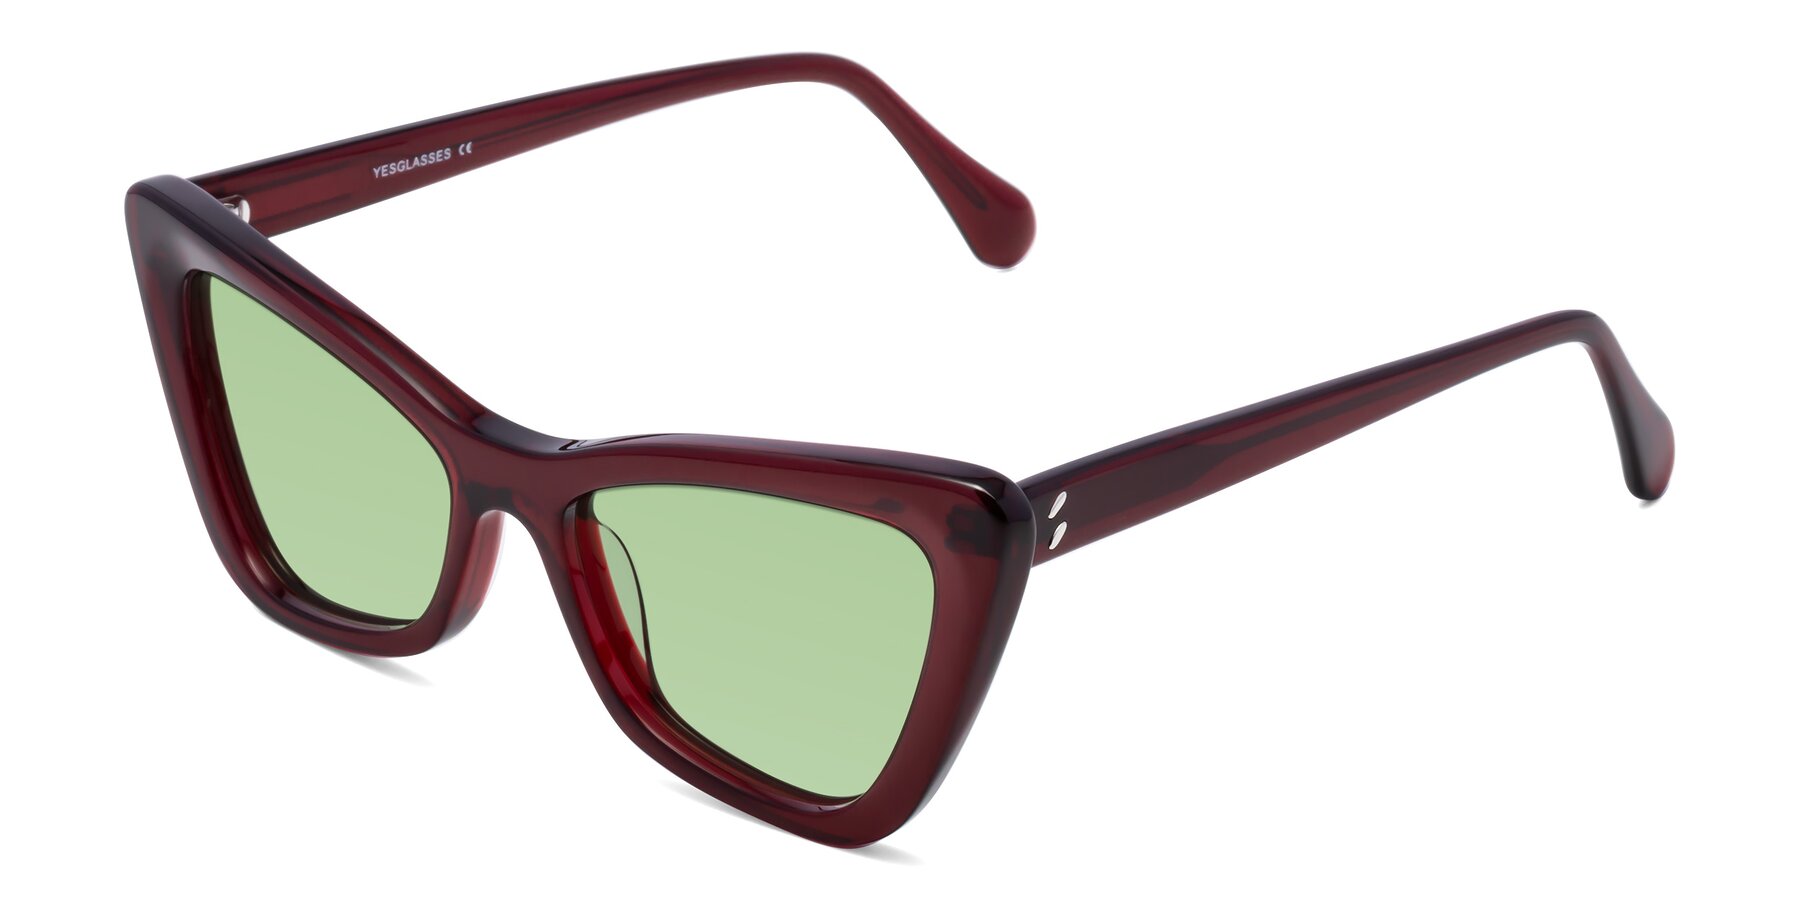 Angle of Rua in Wine with Medium Green Tinted Lenses